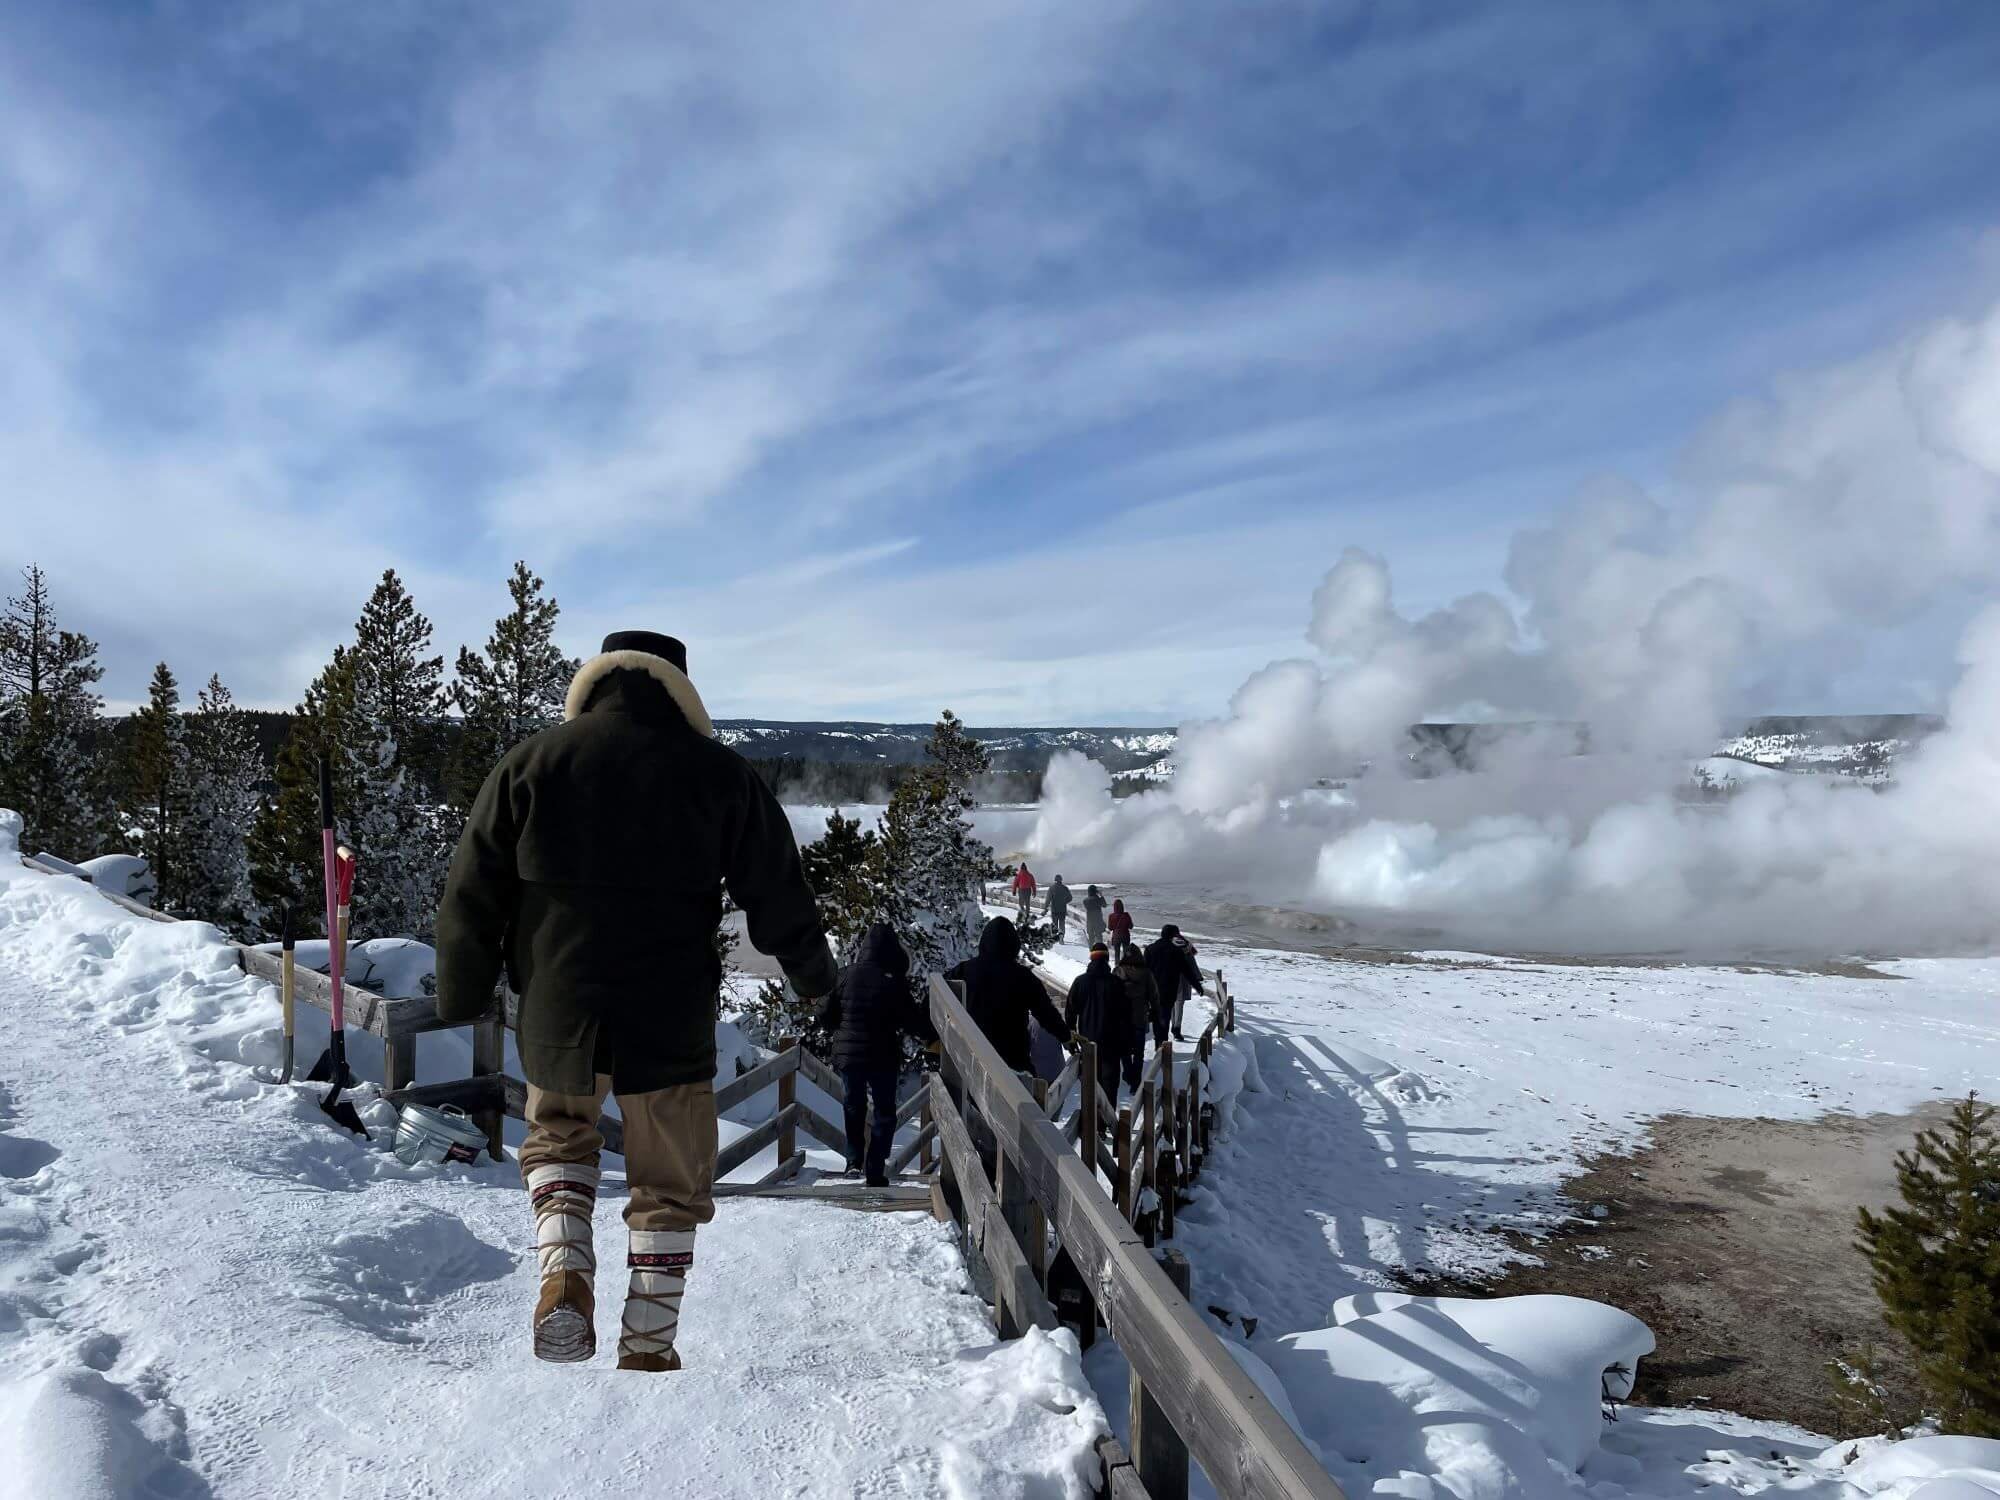  Walking with our snow coach tour to Fountain Geyser 